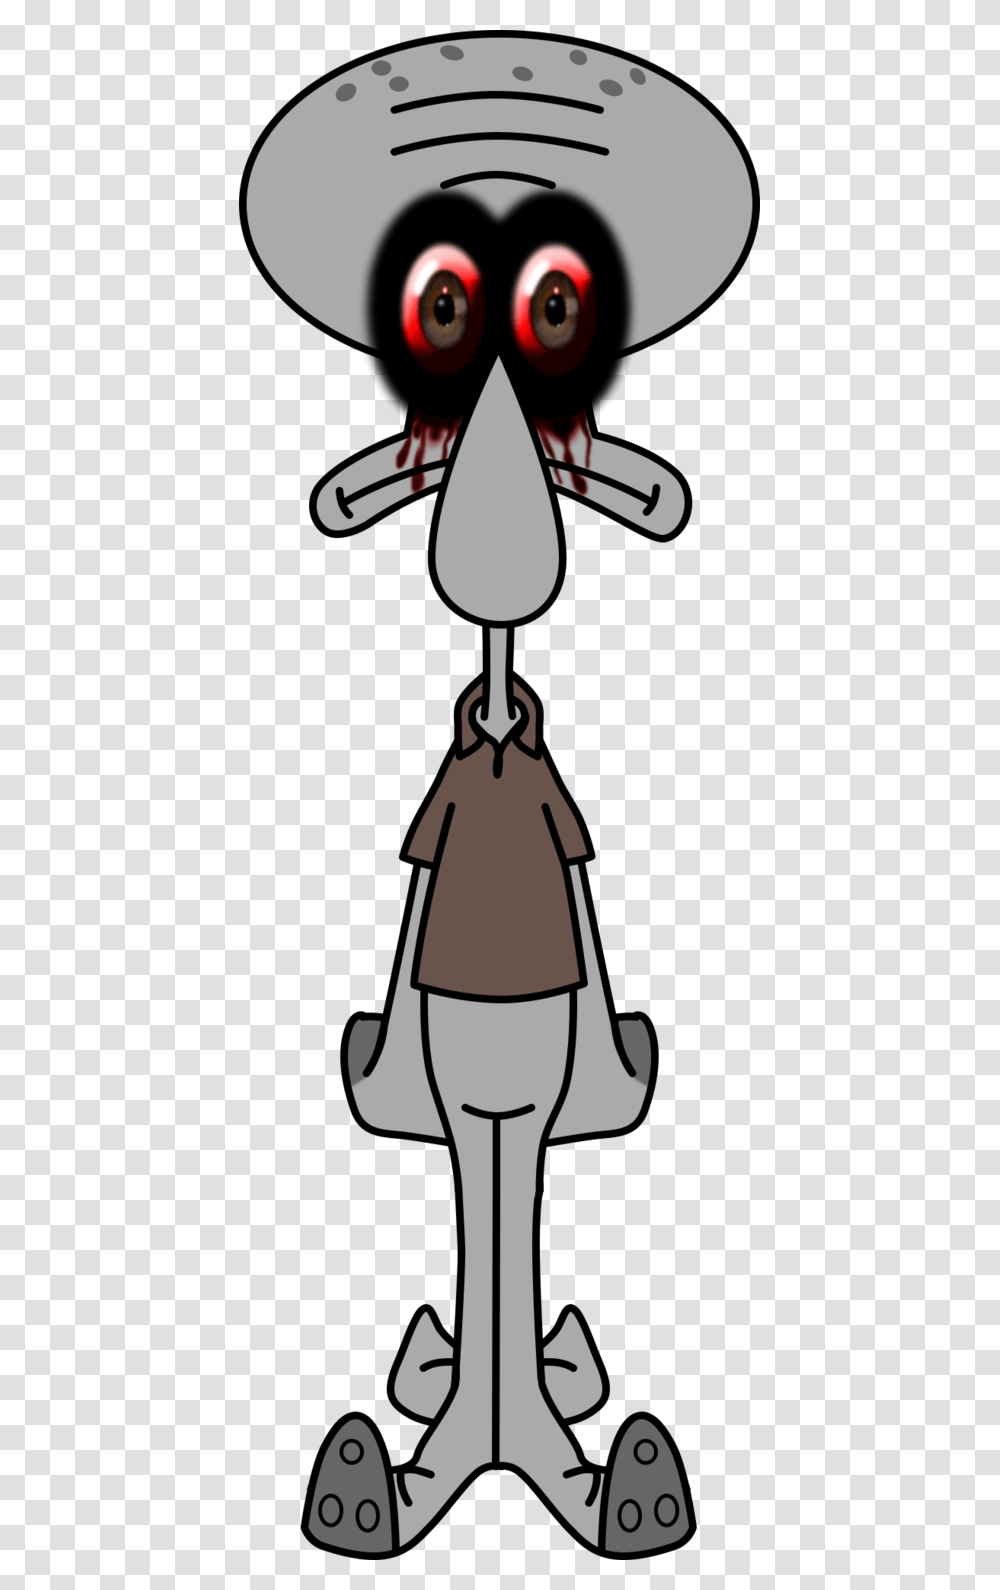 Squidward Tentacles Image Portable Network Graphics Squidward Exe, Apparel, Face, Vacuum Cleaner Transparent Png